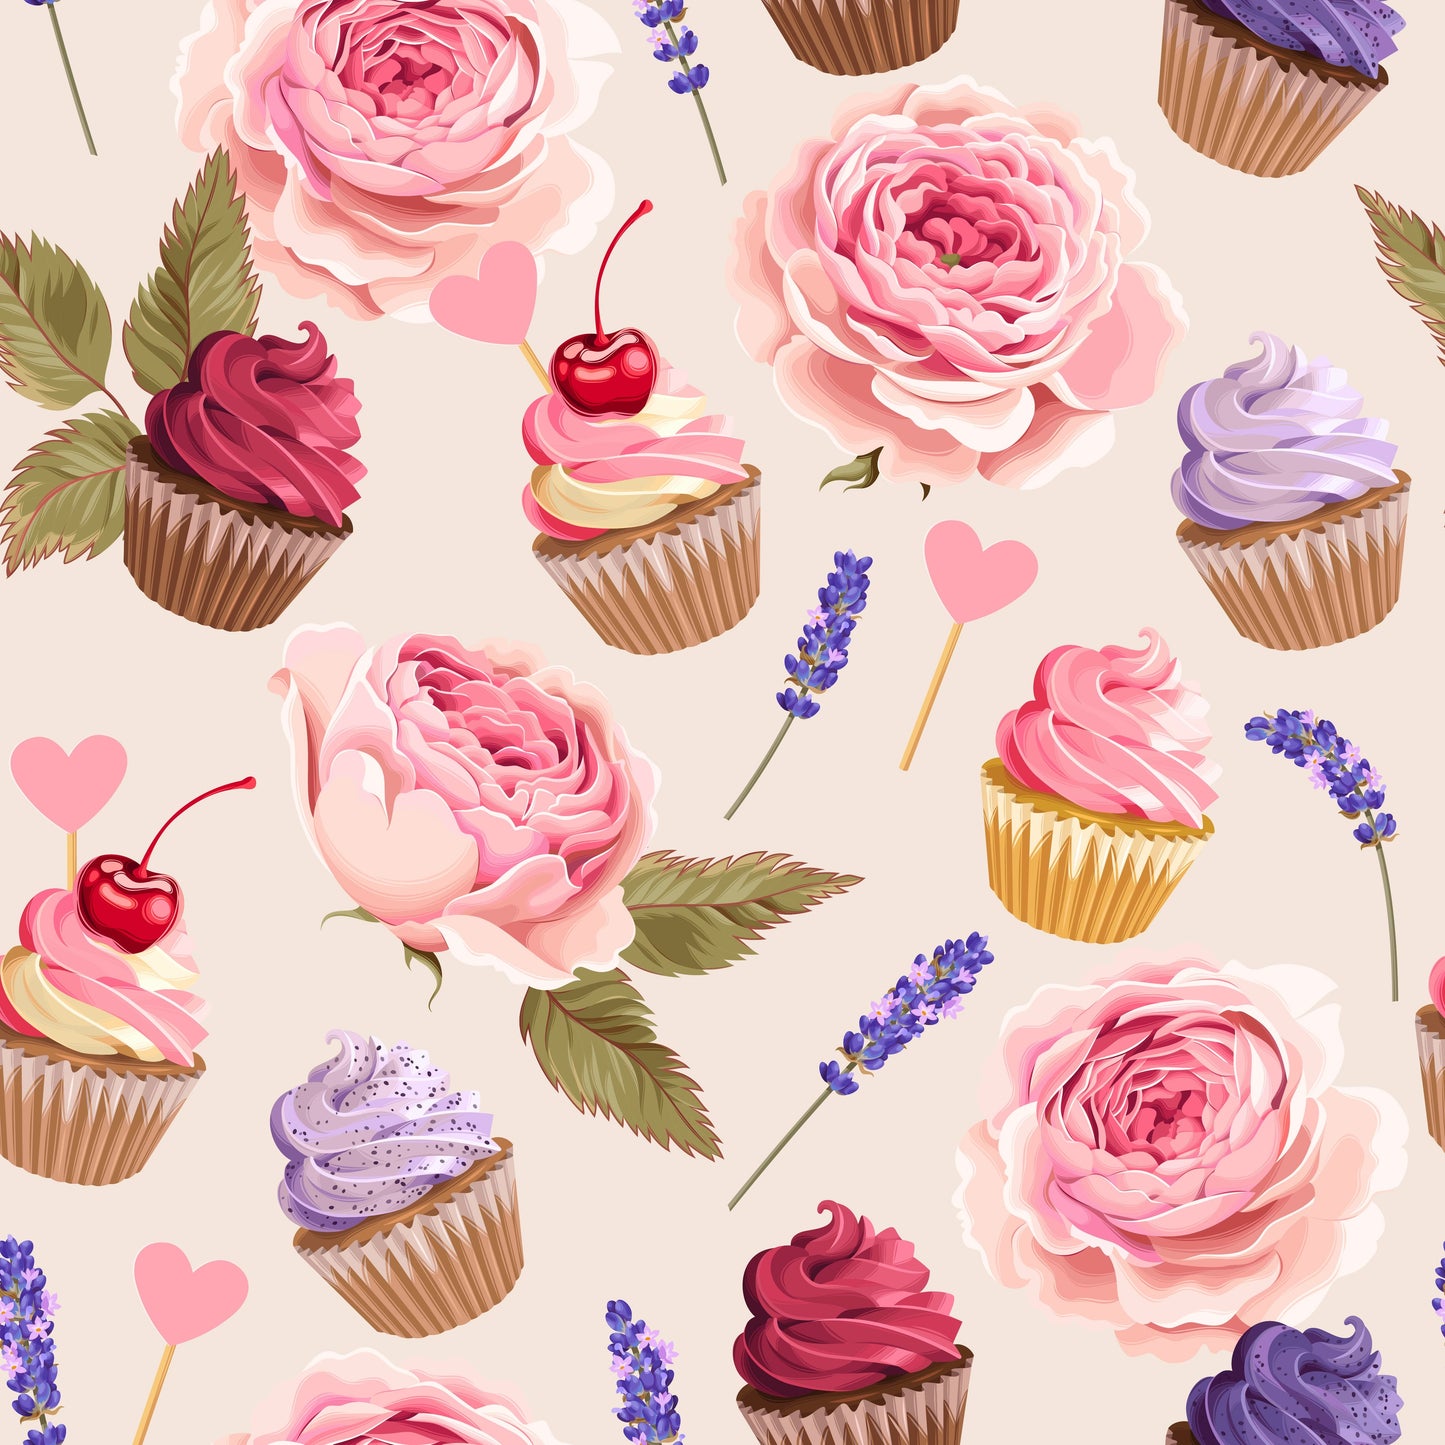 Cupcakes and roses pink